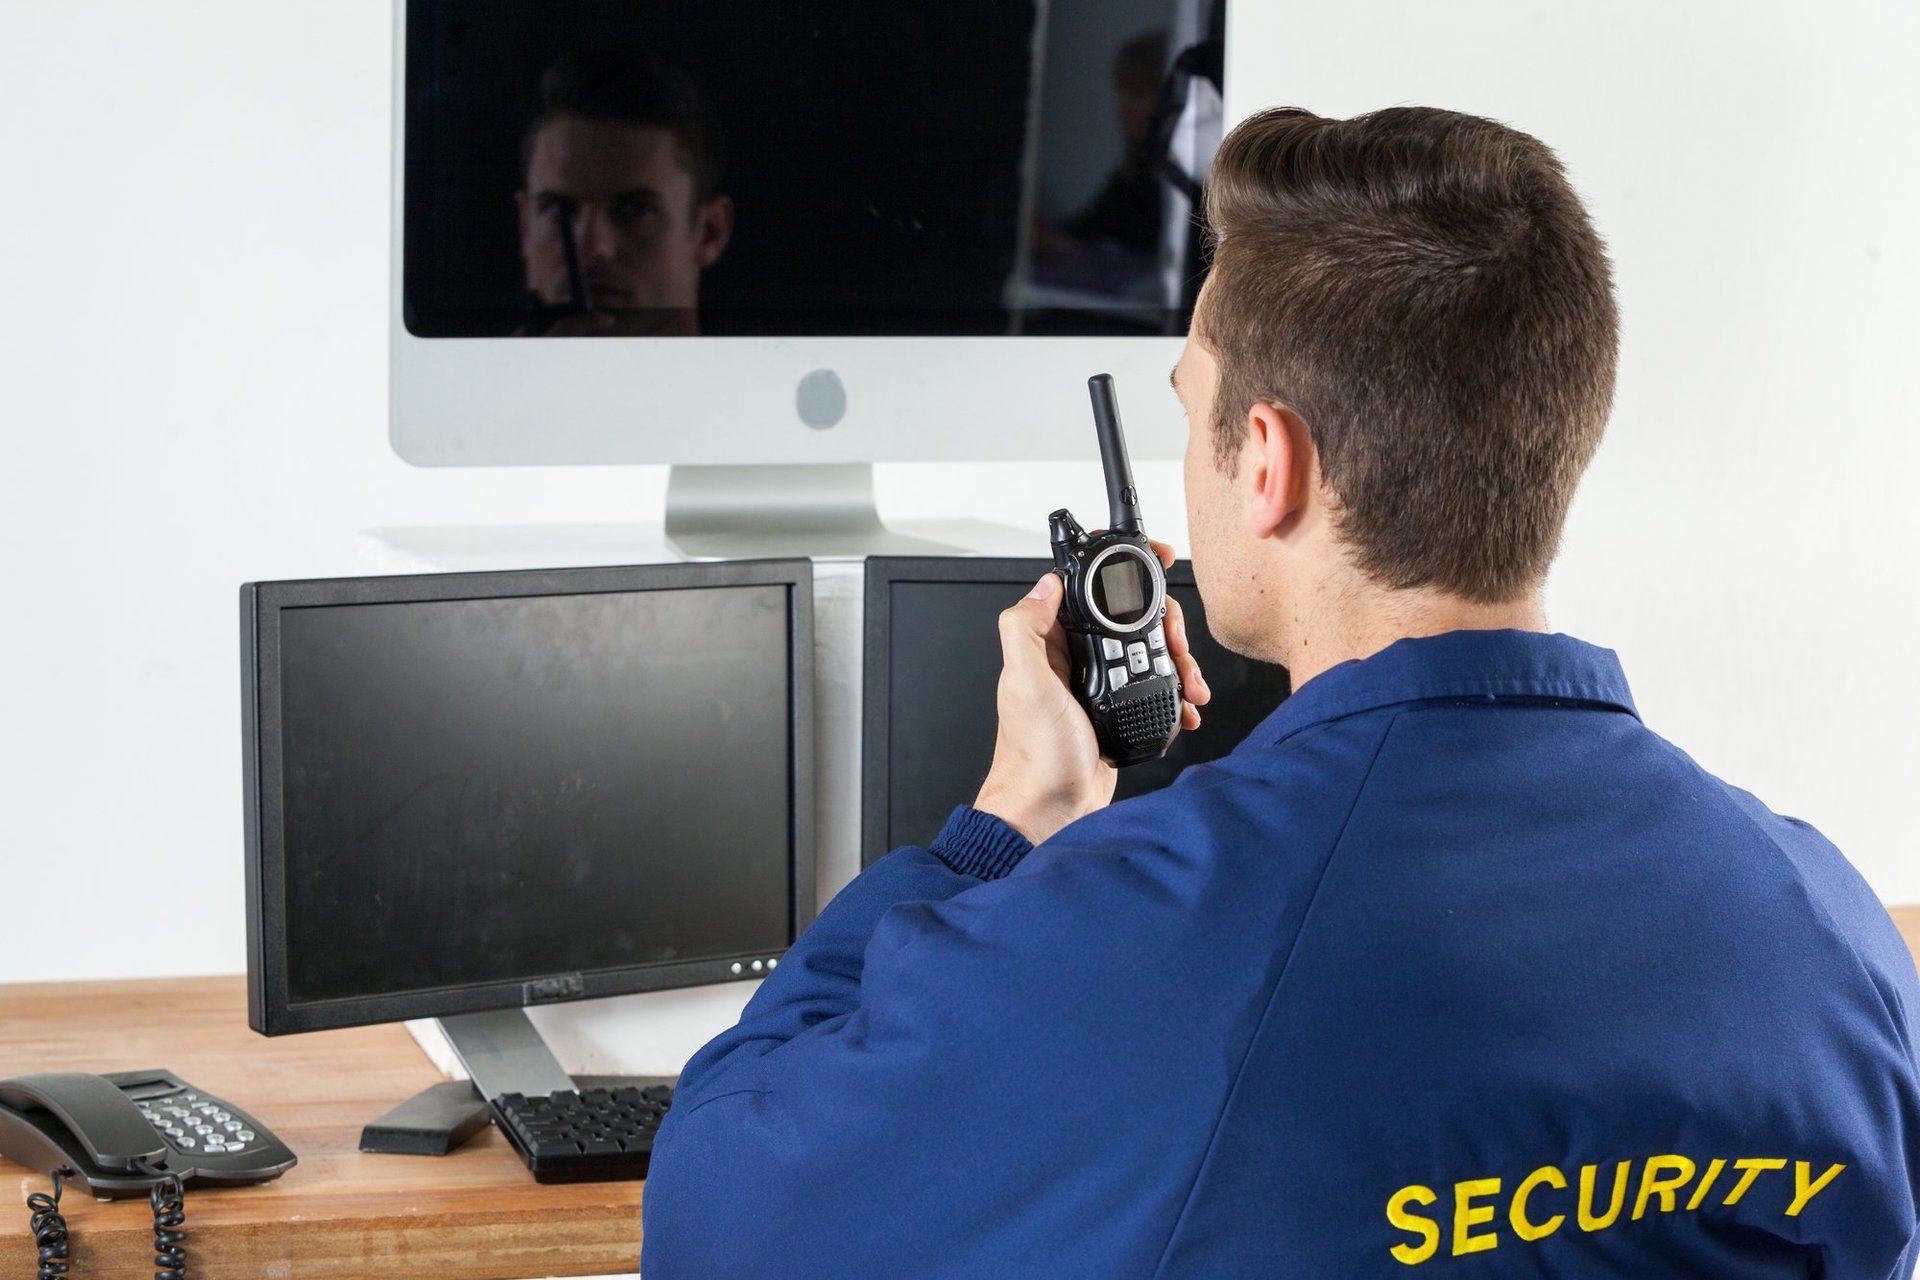 Become a security officer